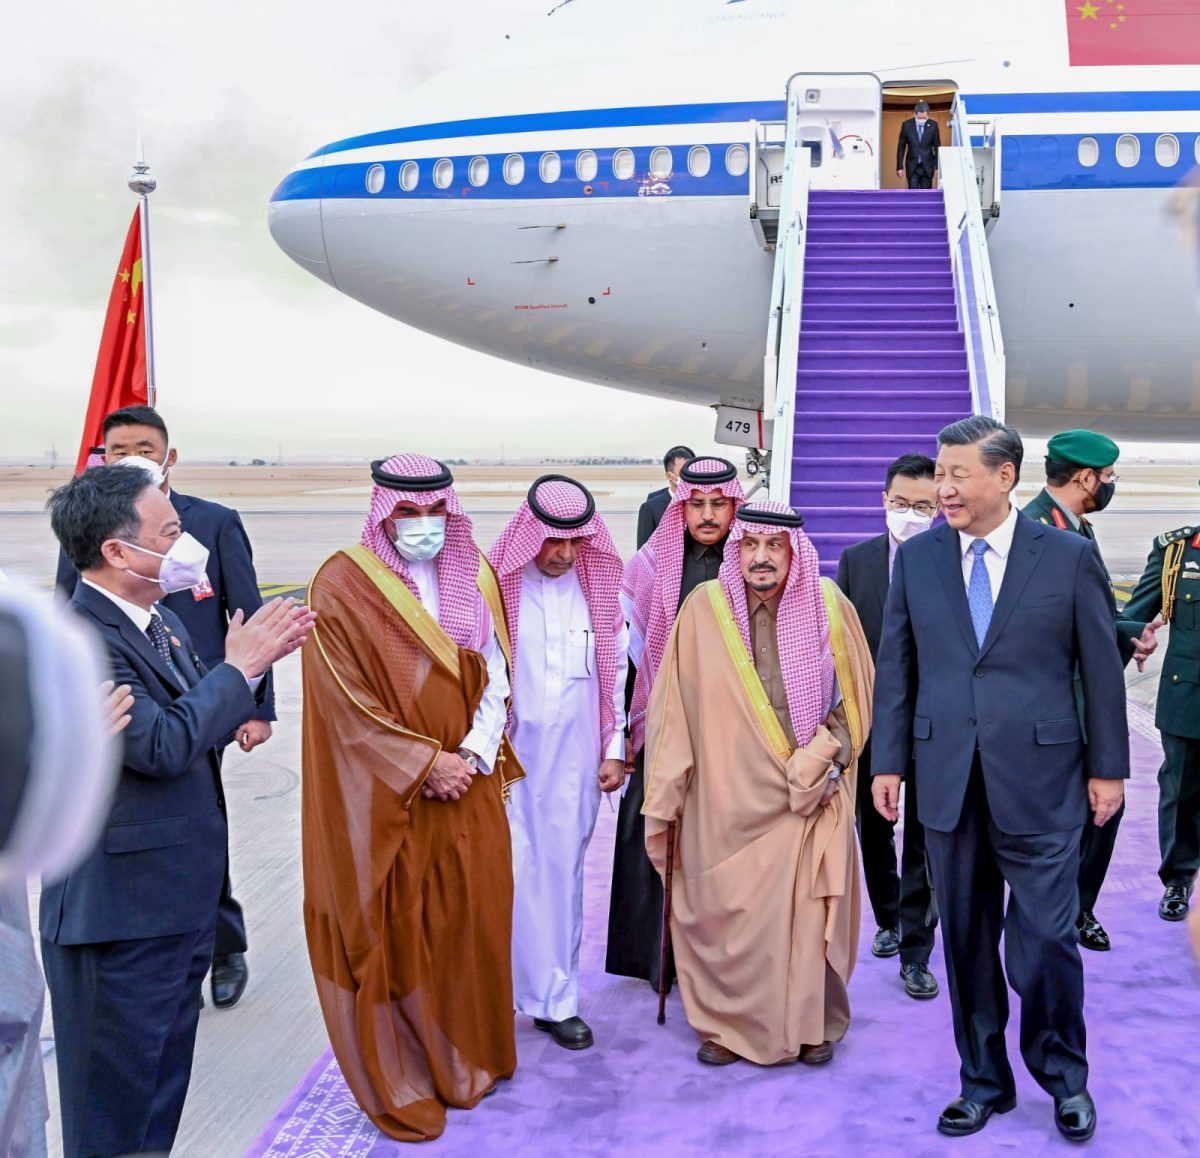 As Xi arrives in Riyadh, experts hope for more investment in CPEC project